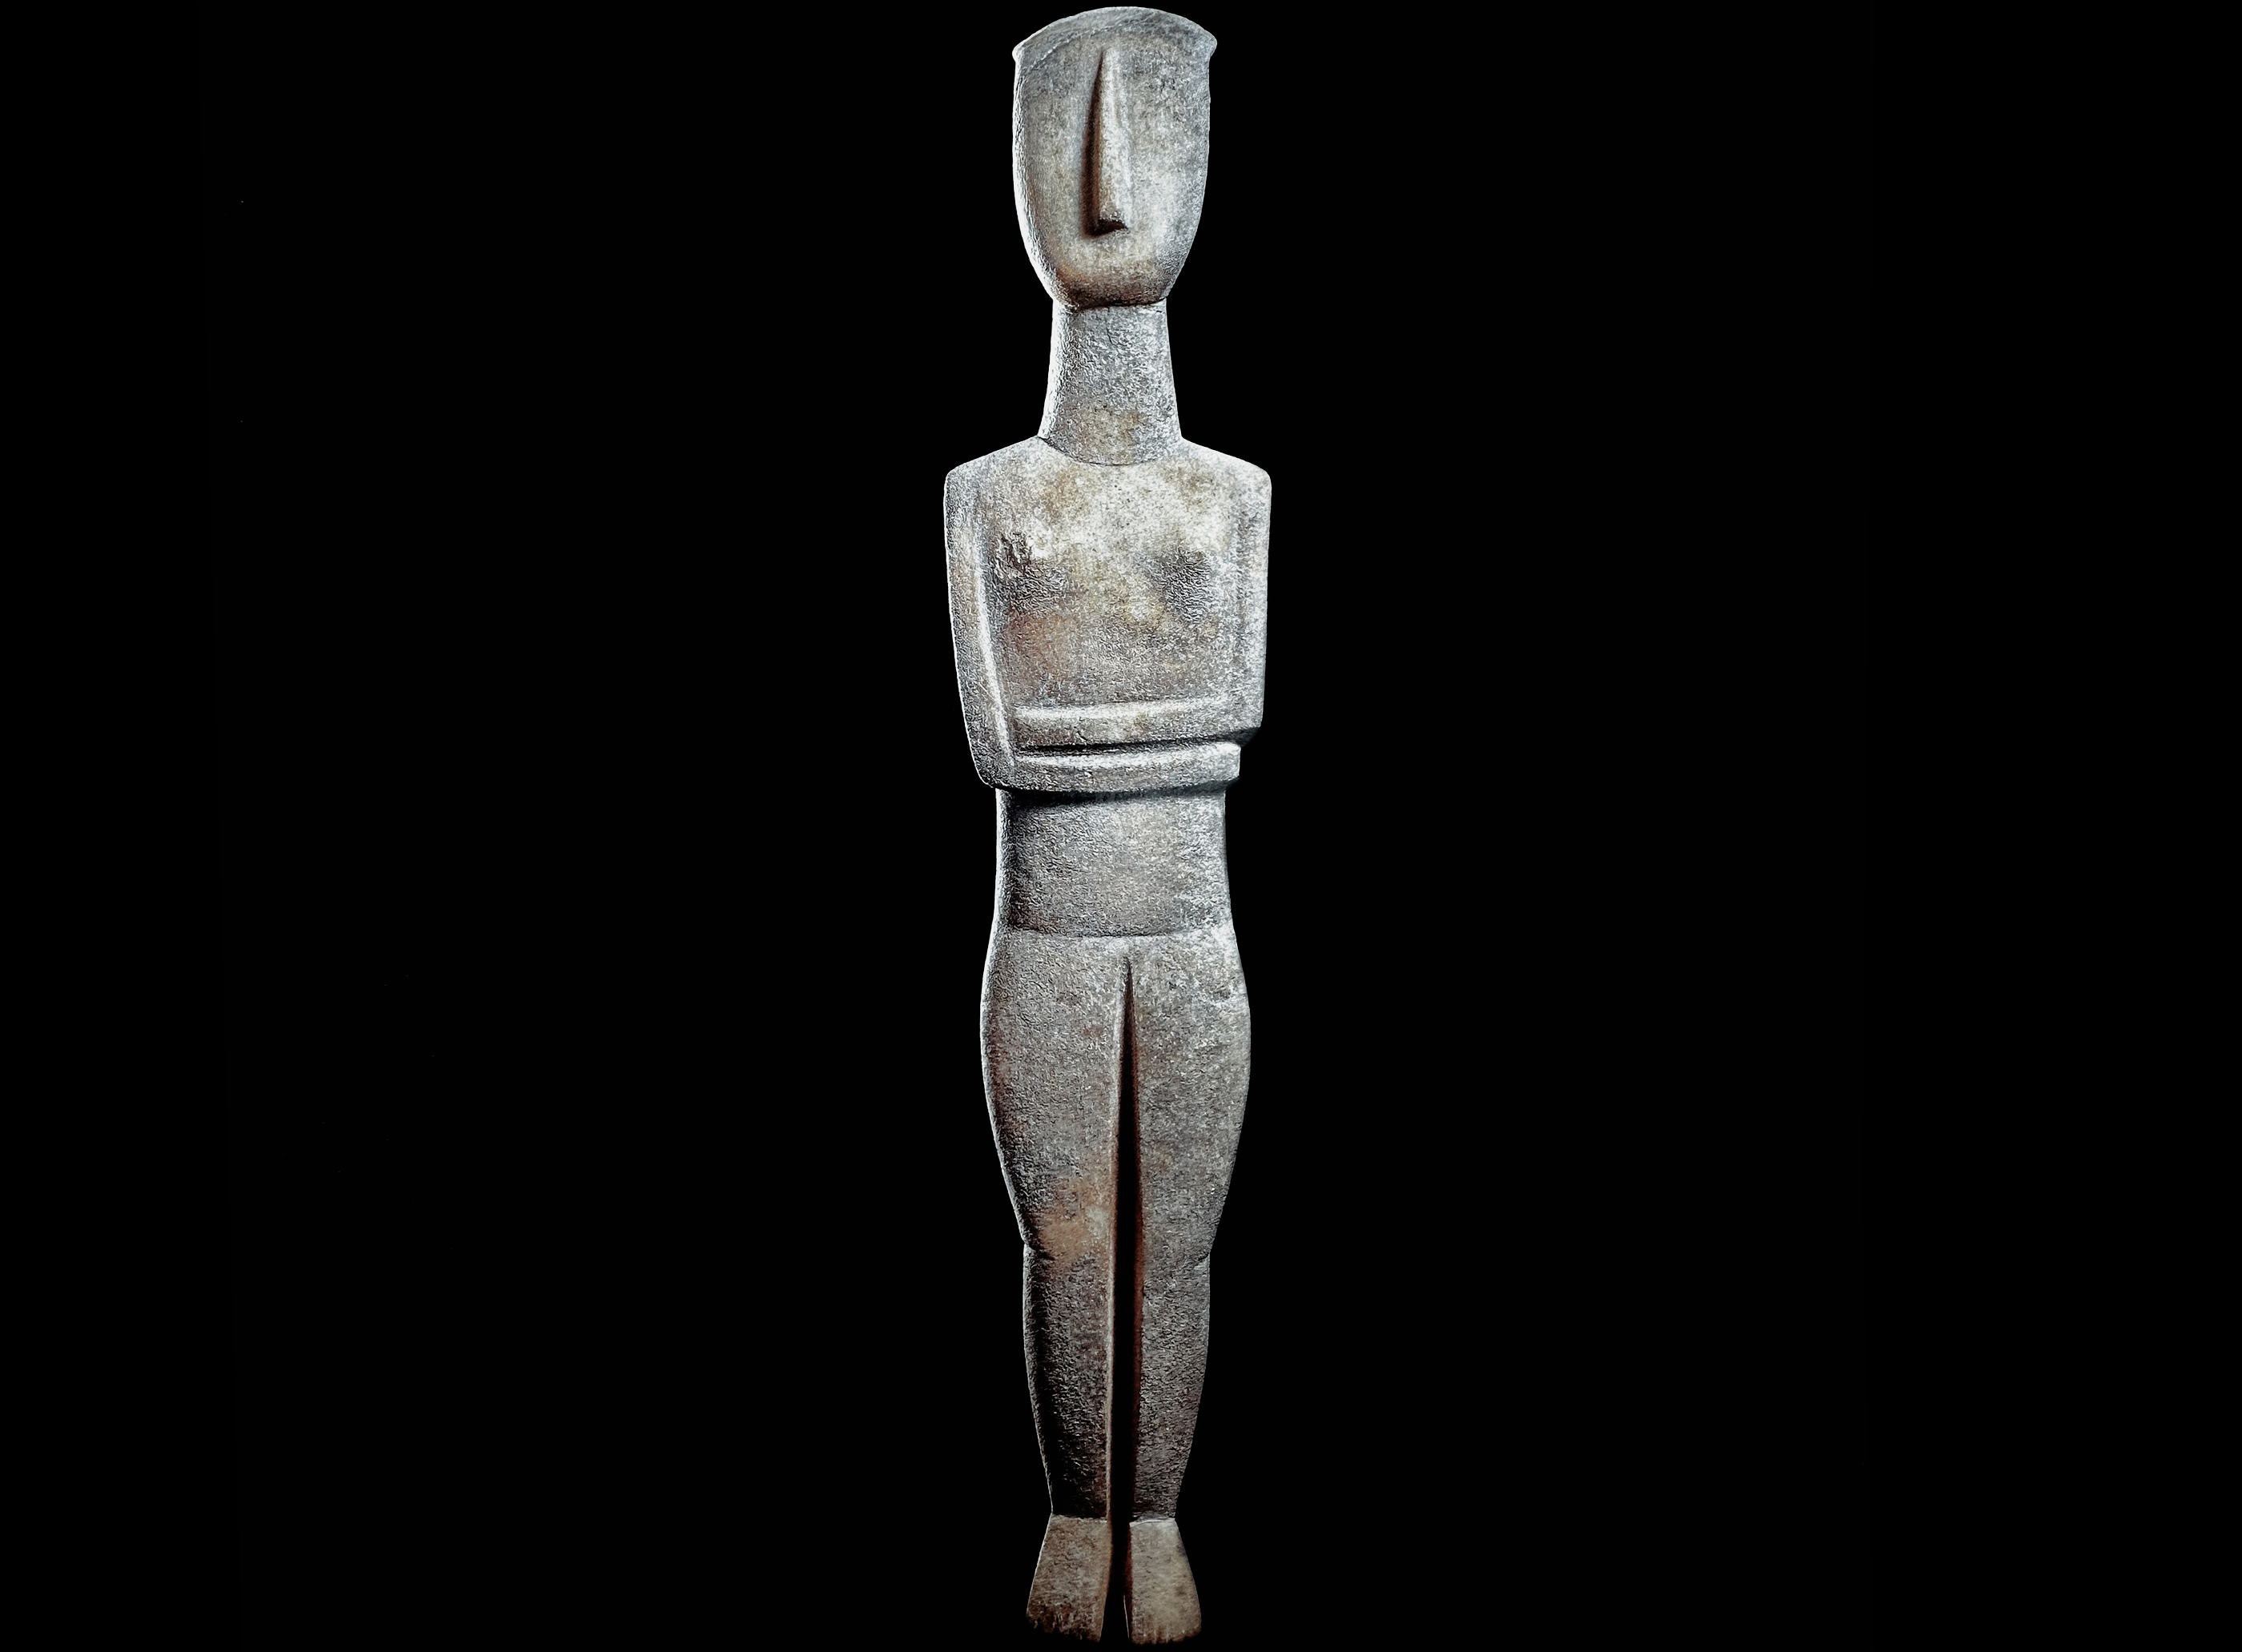 The Cycladic Sculptures - The Fat Lady of Saliagos